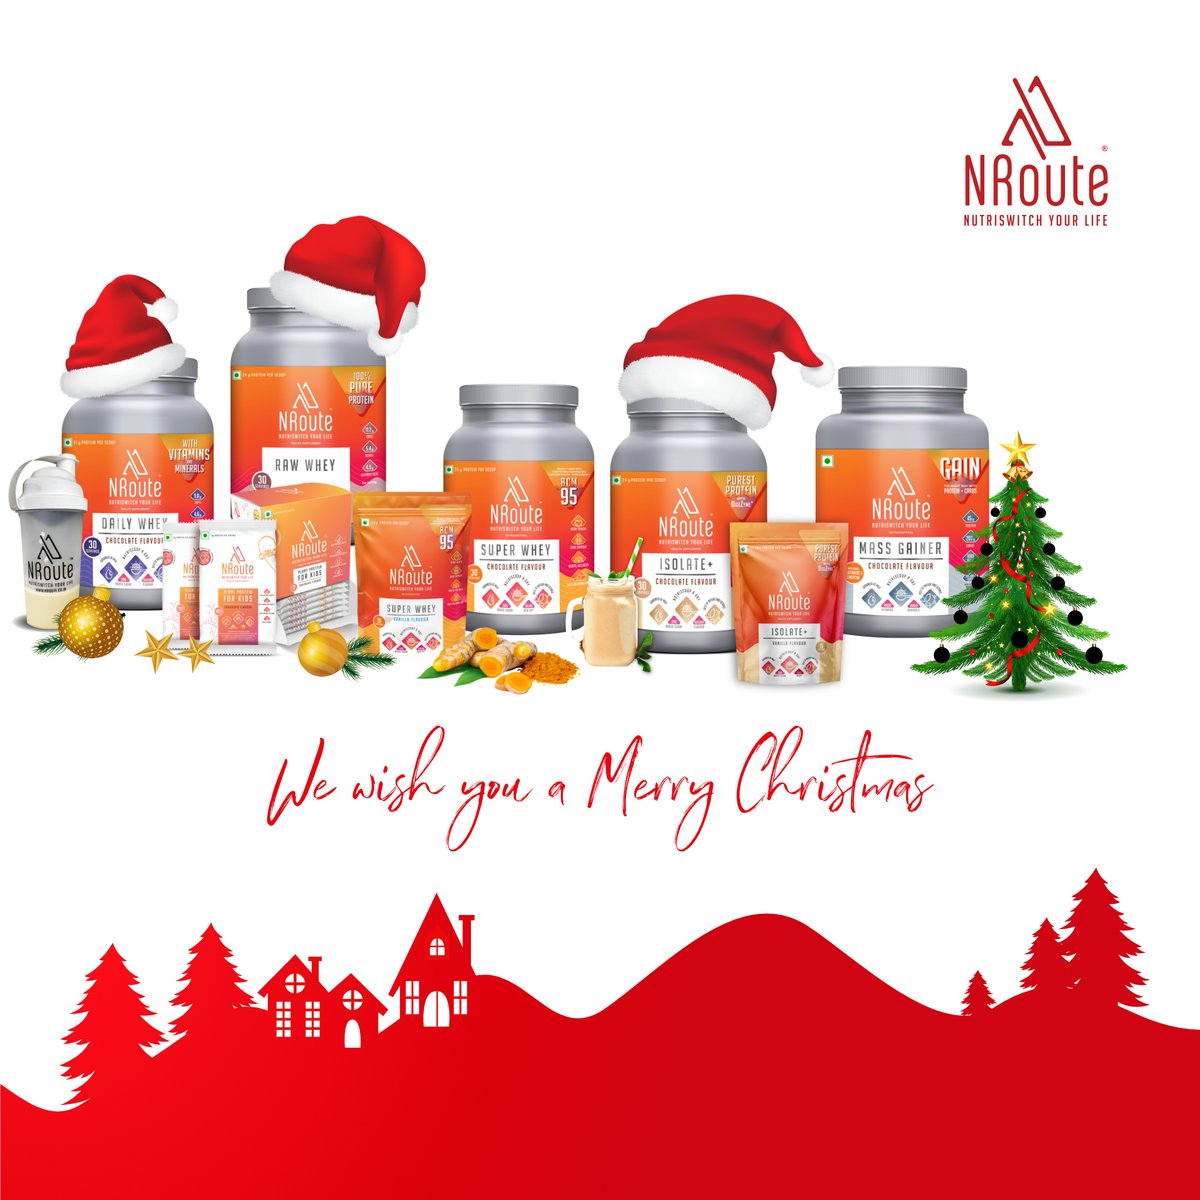 NRoute wishes you and your loved ones a Merry Christmas!

#nroute #merrychristmas #healthylifestyle #health #nroutenutrition #christmas2021 #giftofhealth